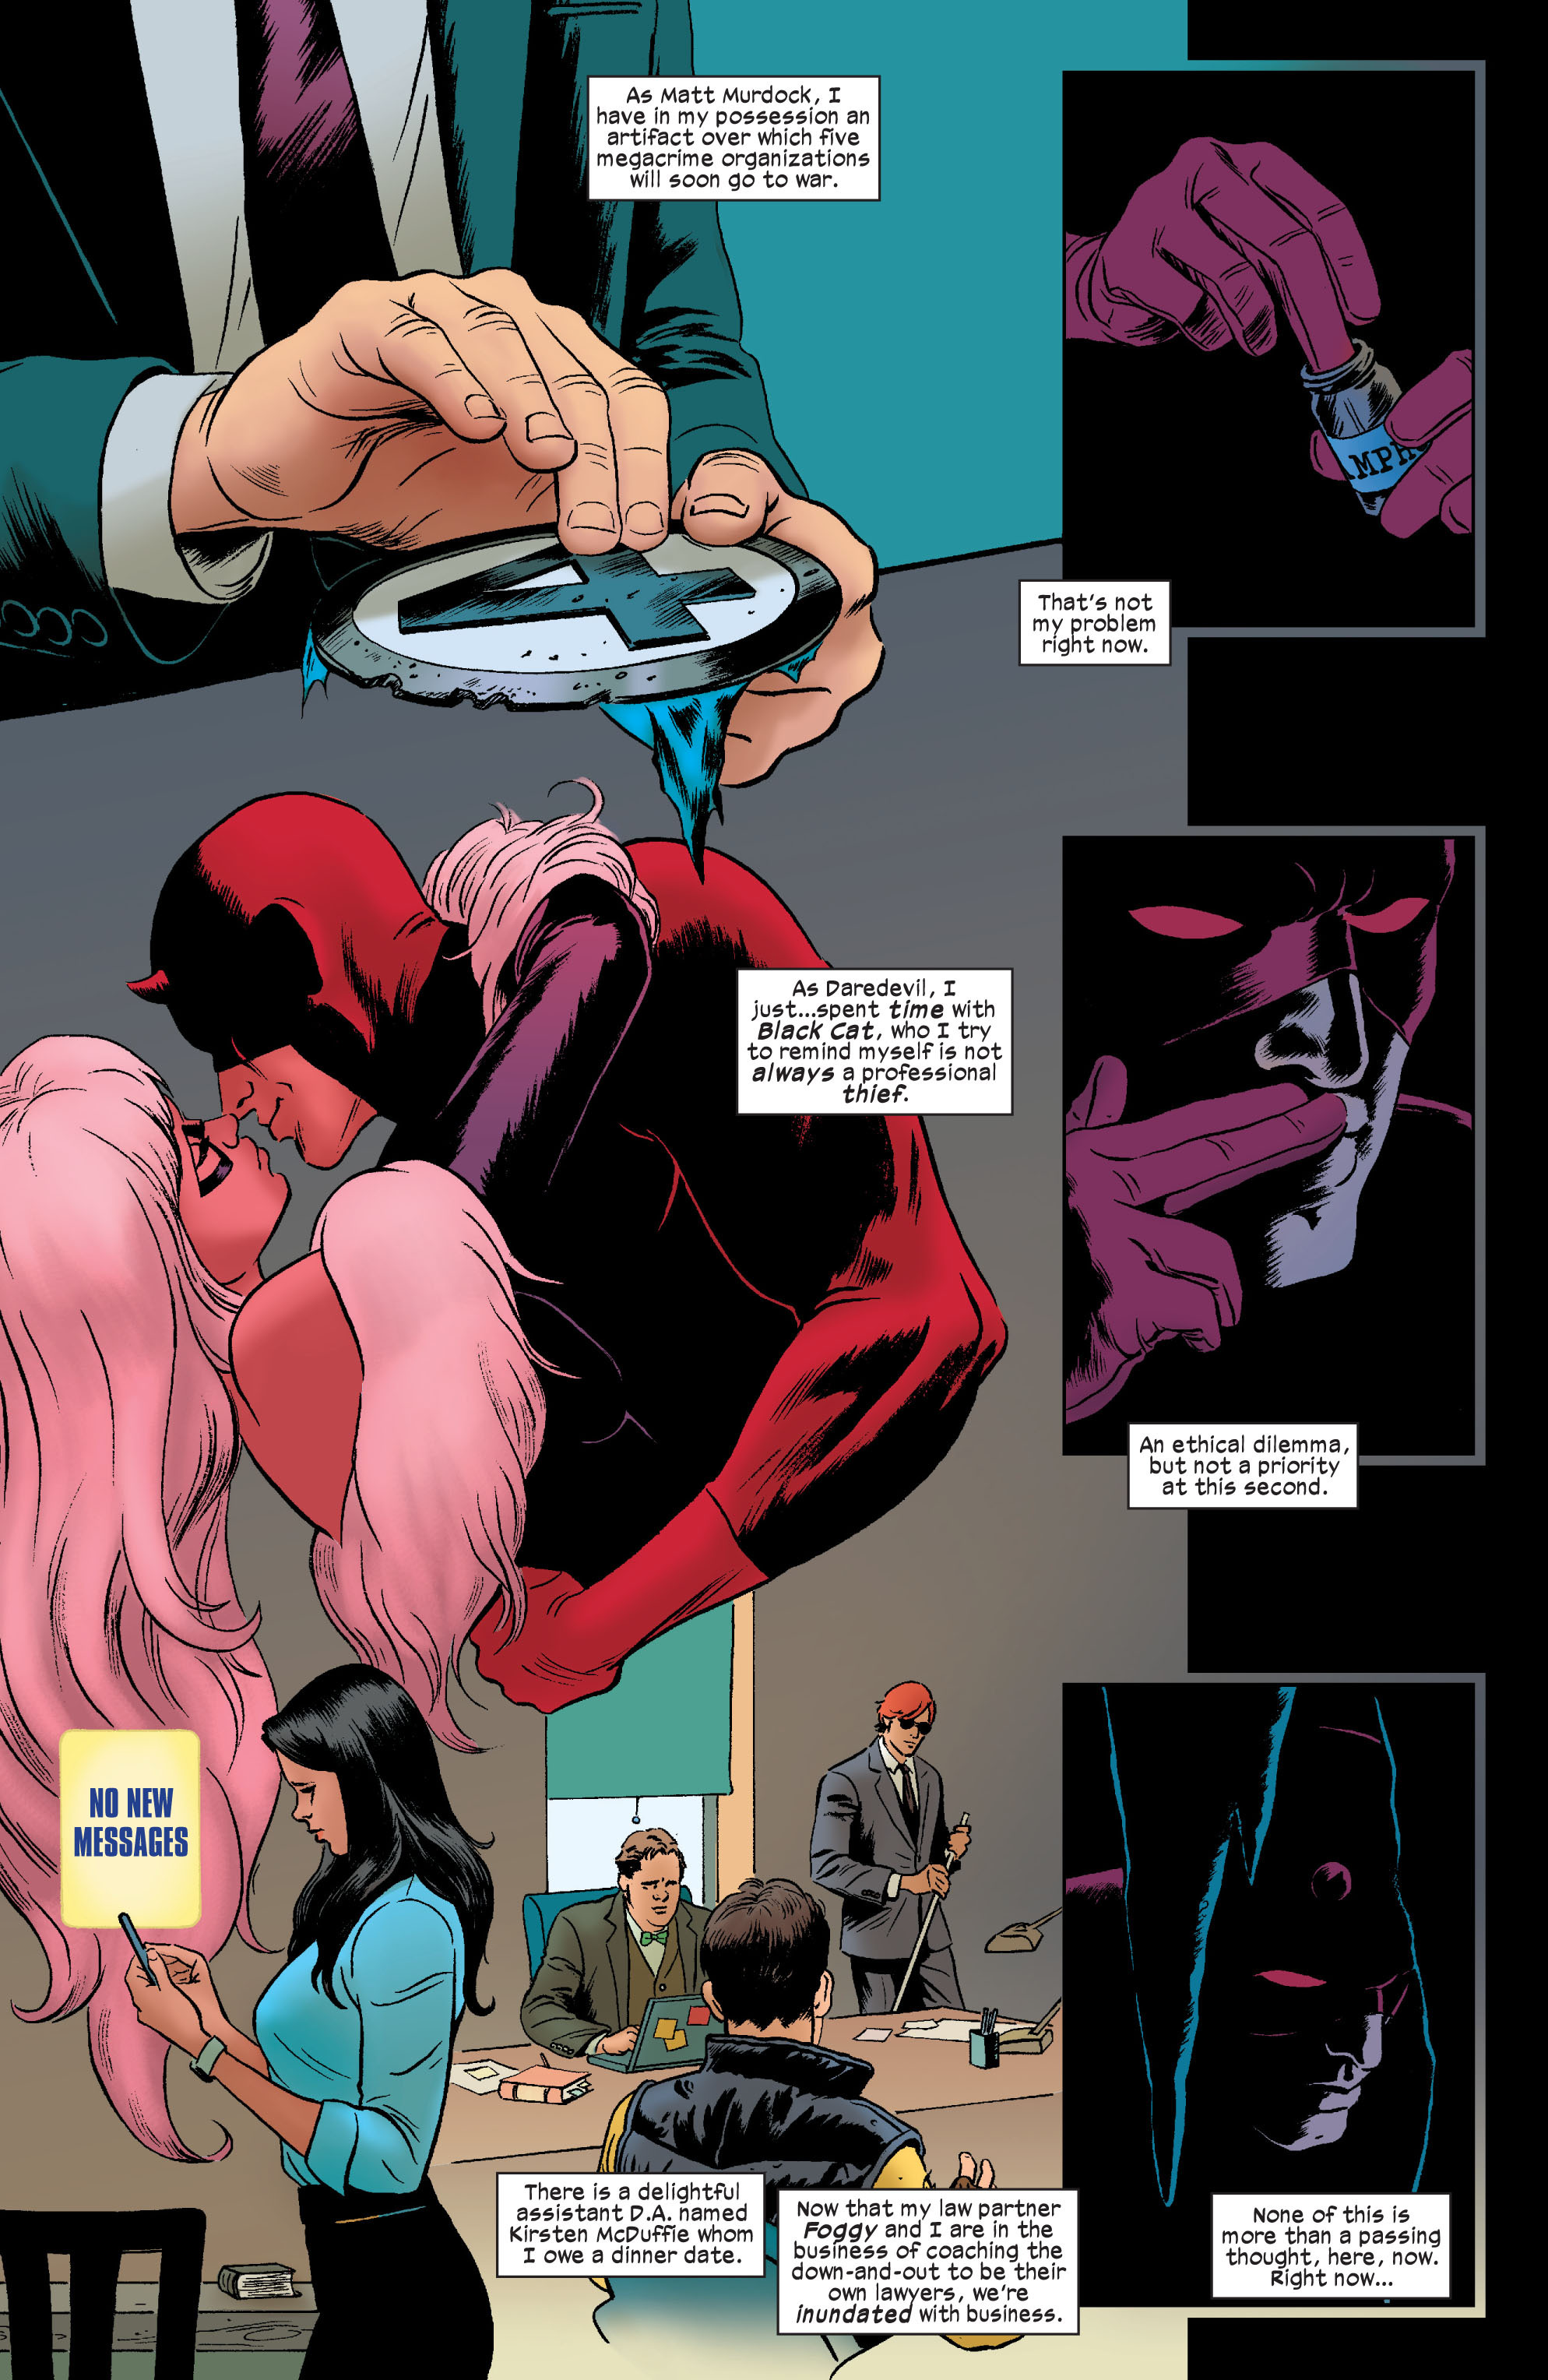 Daredevil 2011 Issue 9 | Viewcomic reading comics online for ...